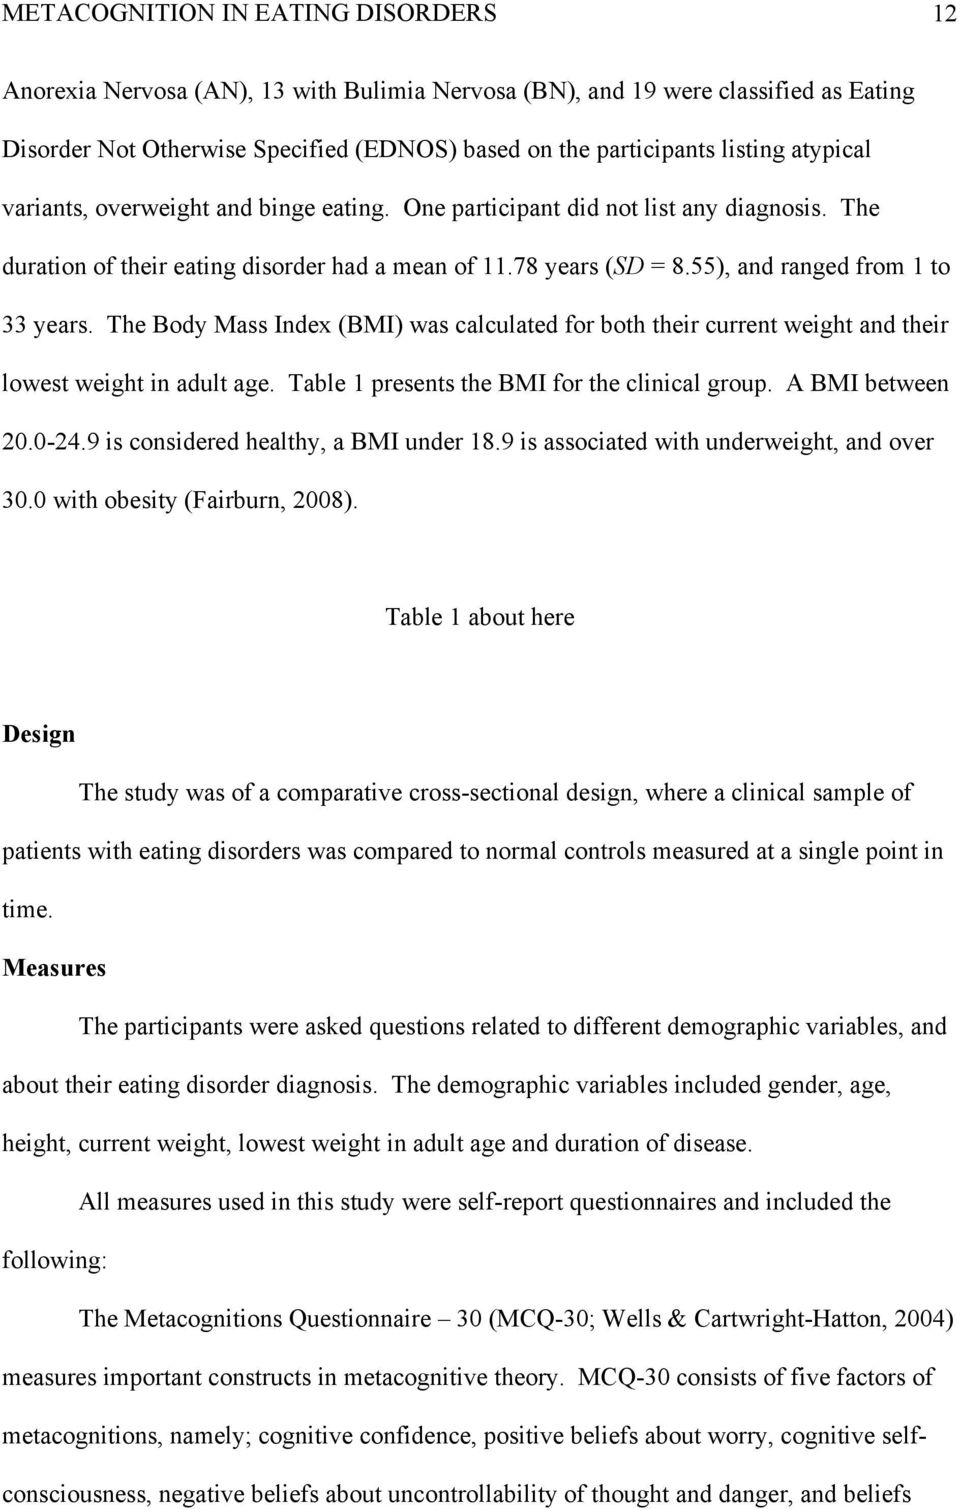 The Body Mass Index (BMI) was calculated for both their current weight and their lowest weight in adult age. Table 1 presents the BMI for the clinical group. A BMI between 20.0-24.